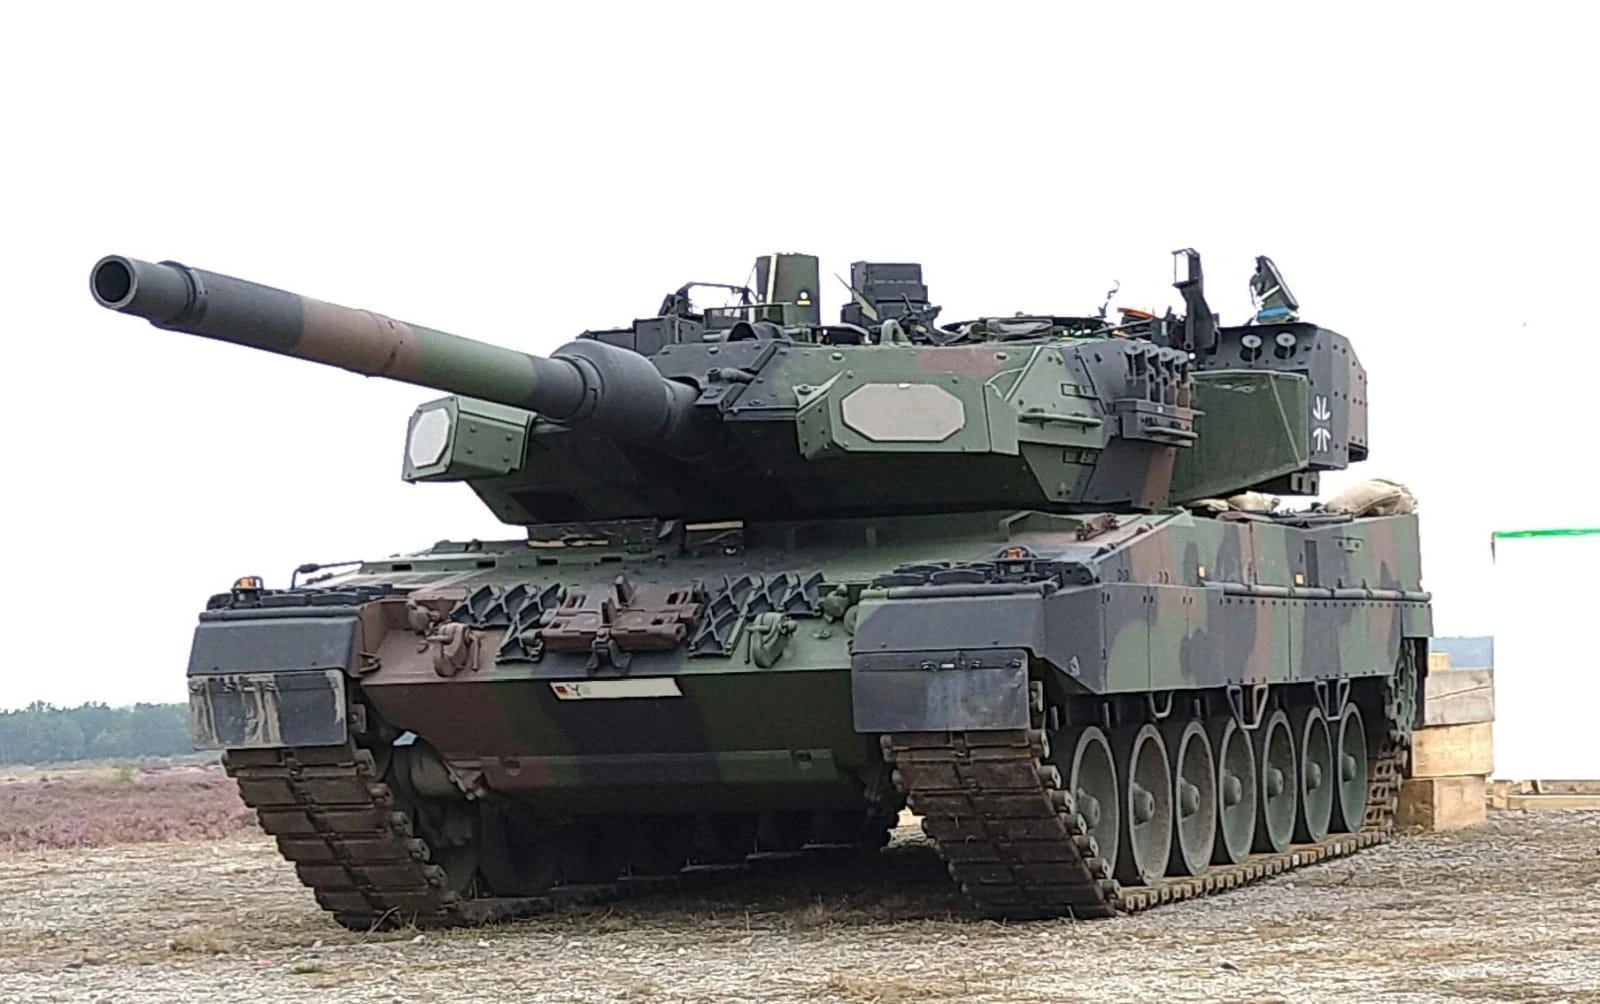 Rafael's TROPHY System demonstrated the LEOPARD 2 MBT